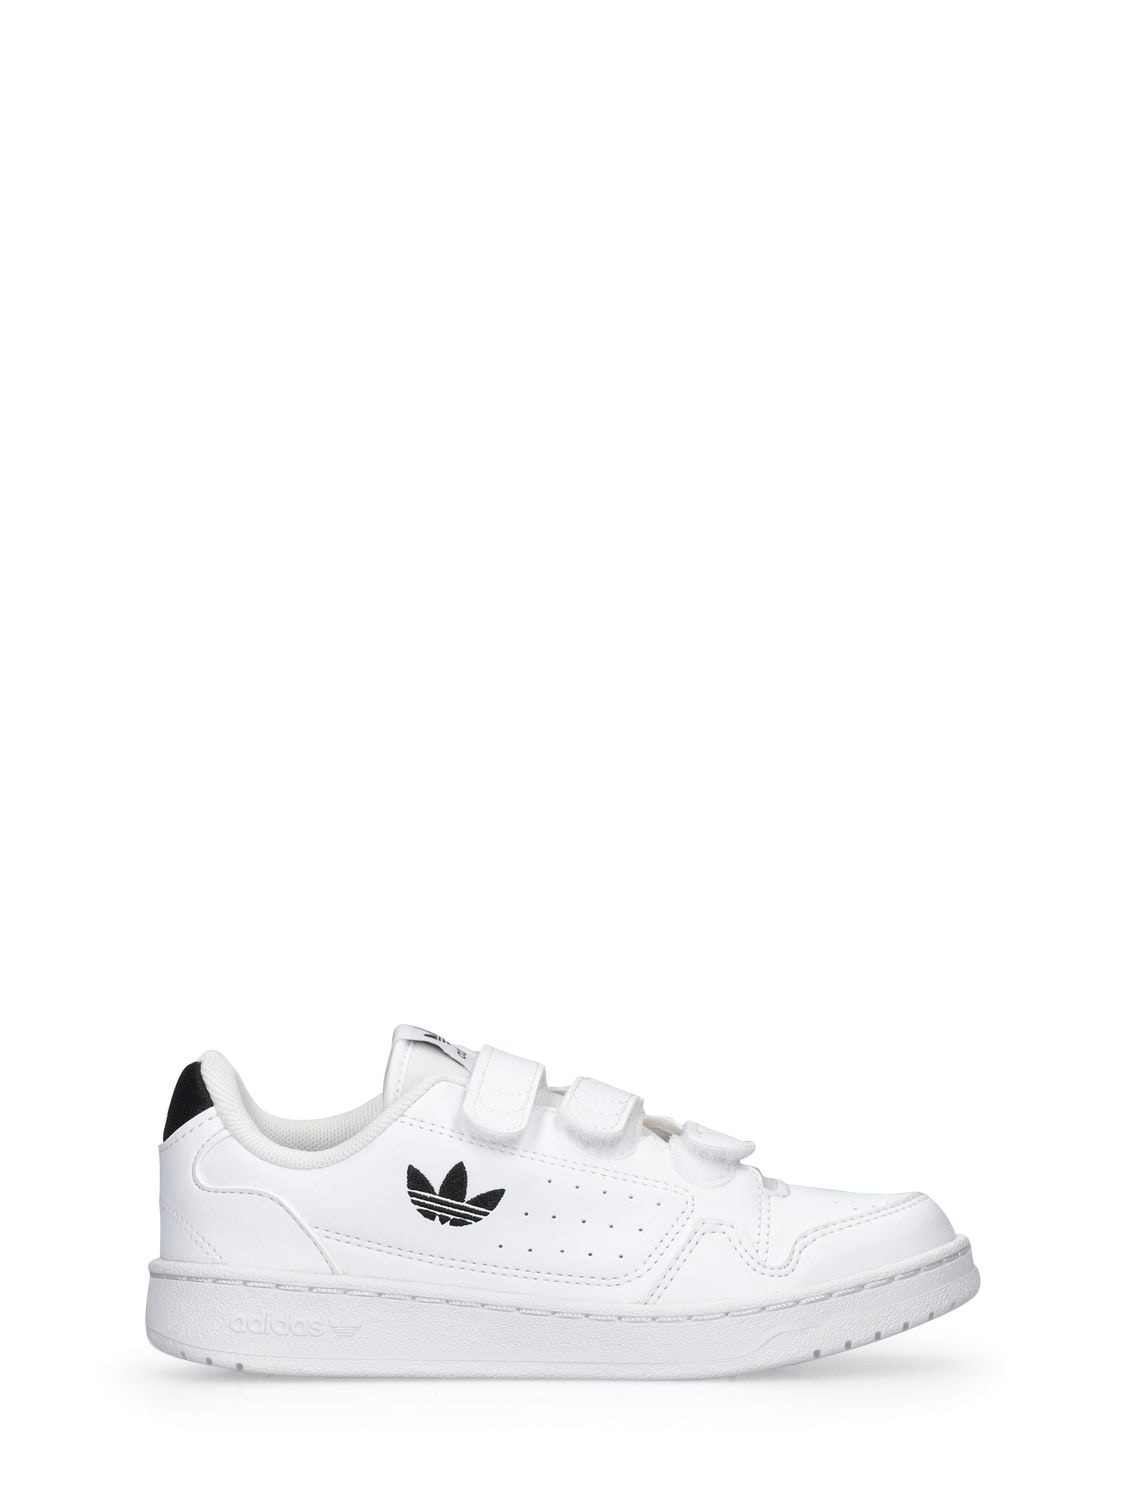 Kids\' | Originals Ny 90 Recycled Faux ModeSens In Sneakers Adidas Leather White